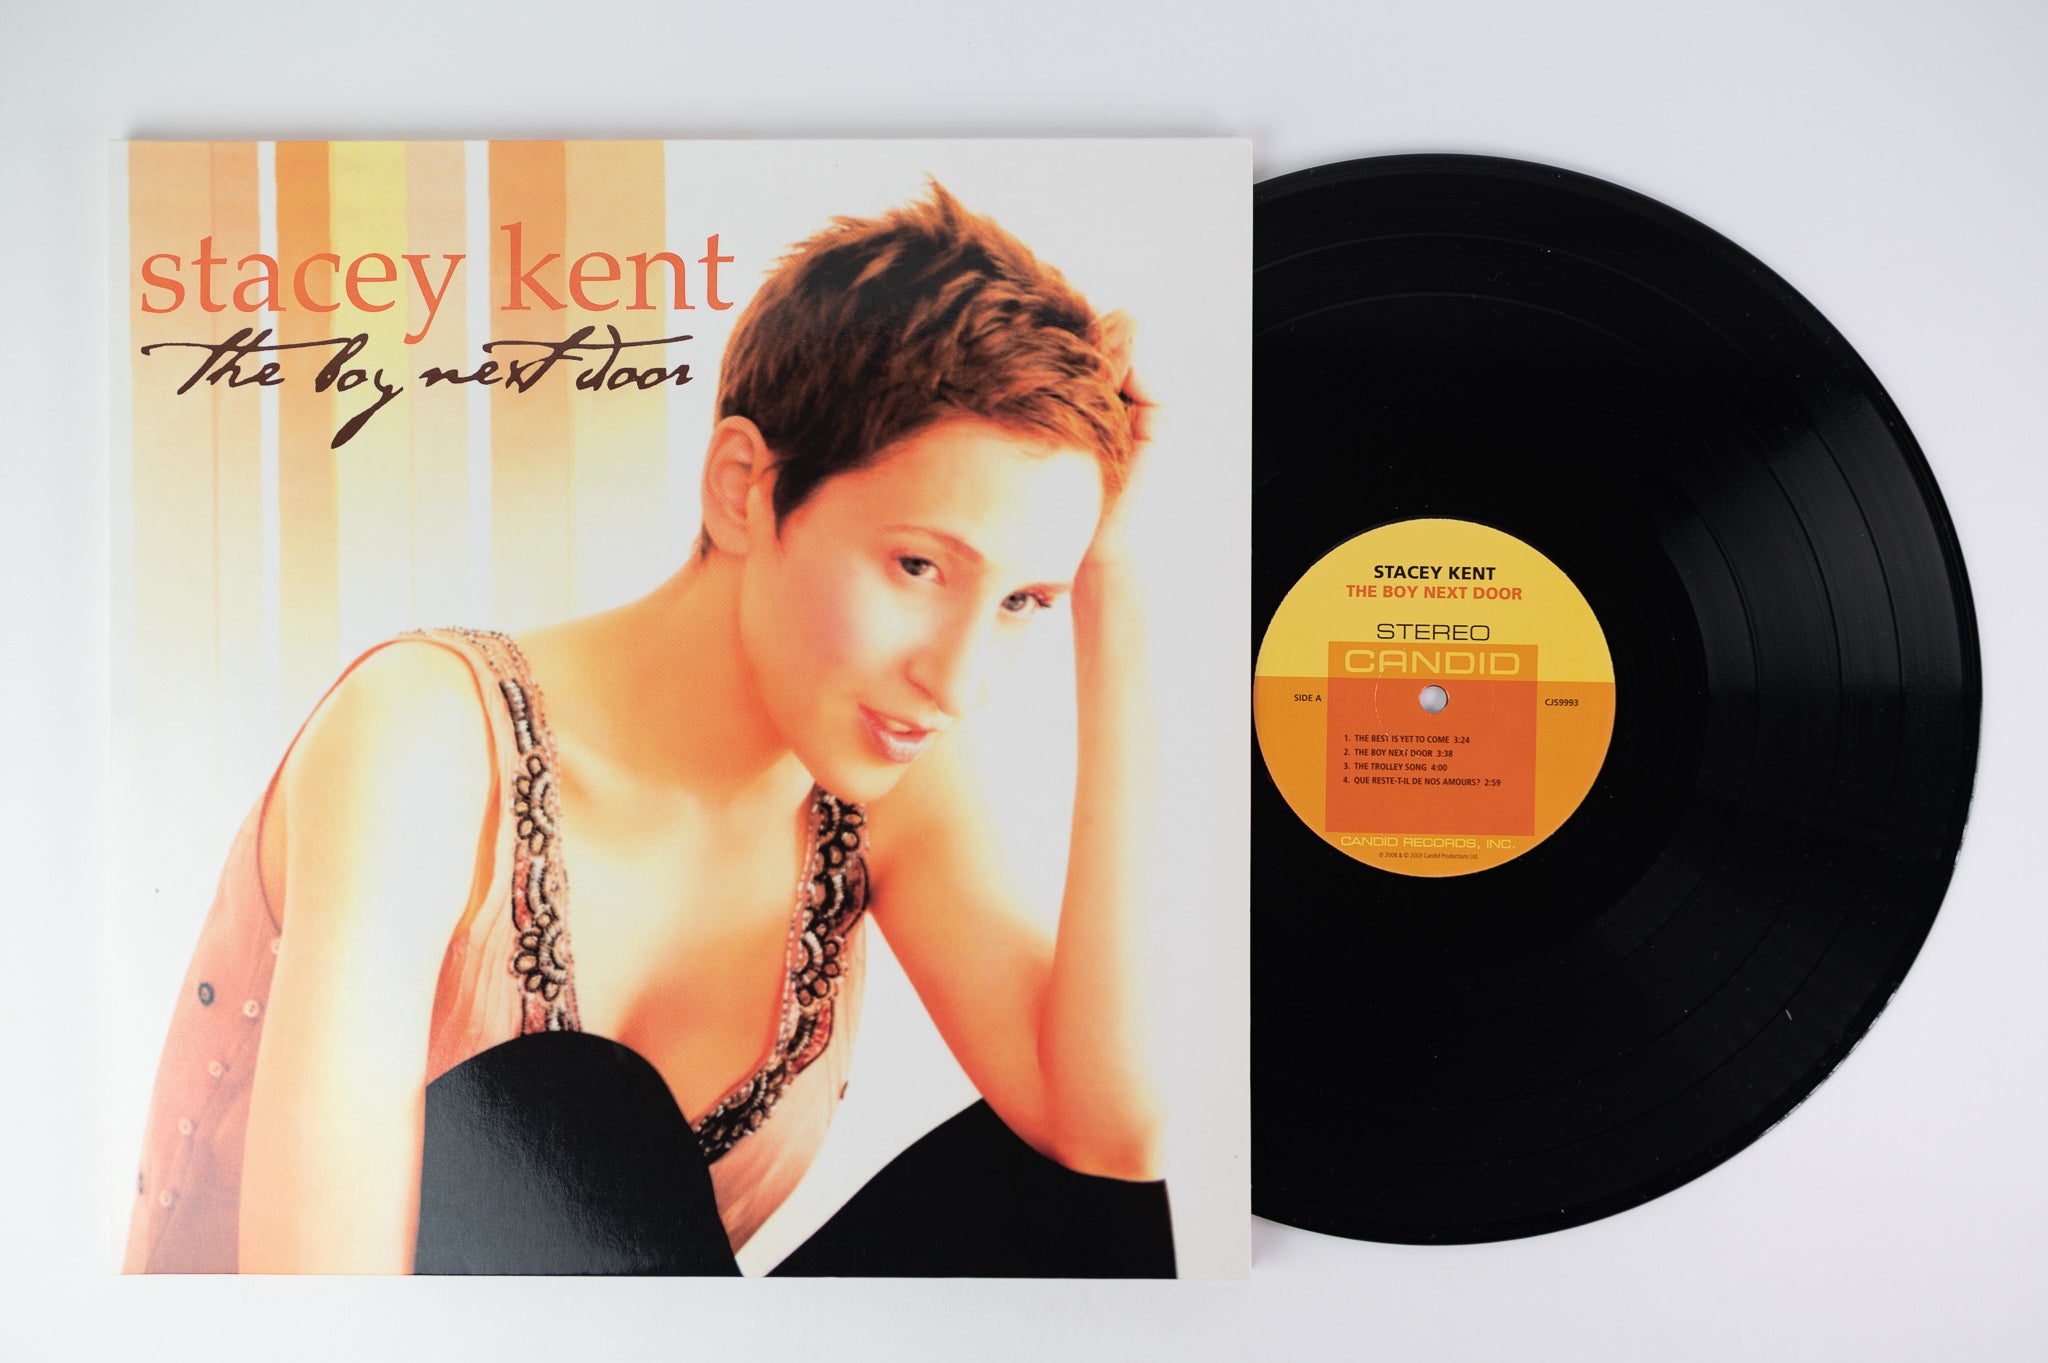 Stacey Kent - The Boy Next Door on Candid / Pure Pleasure Records